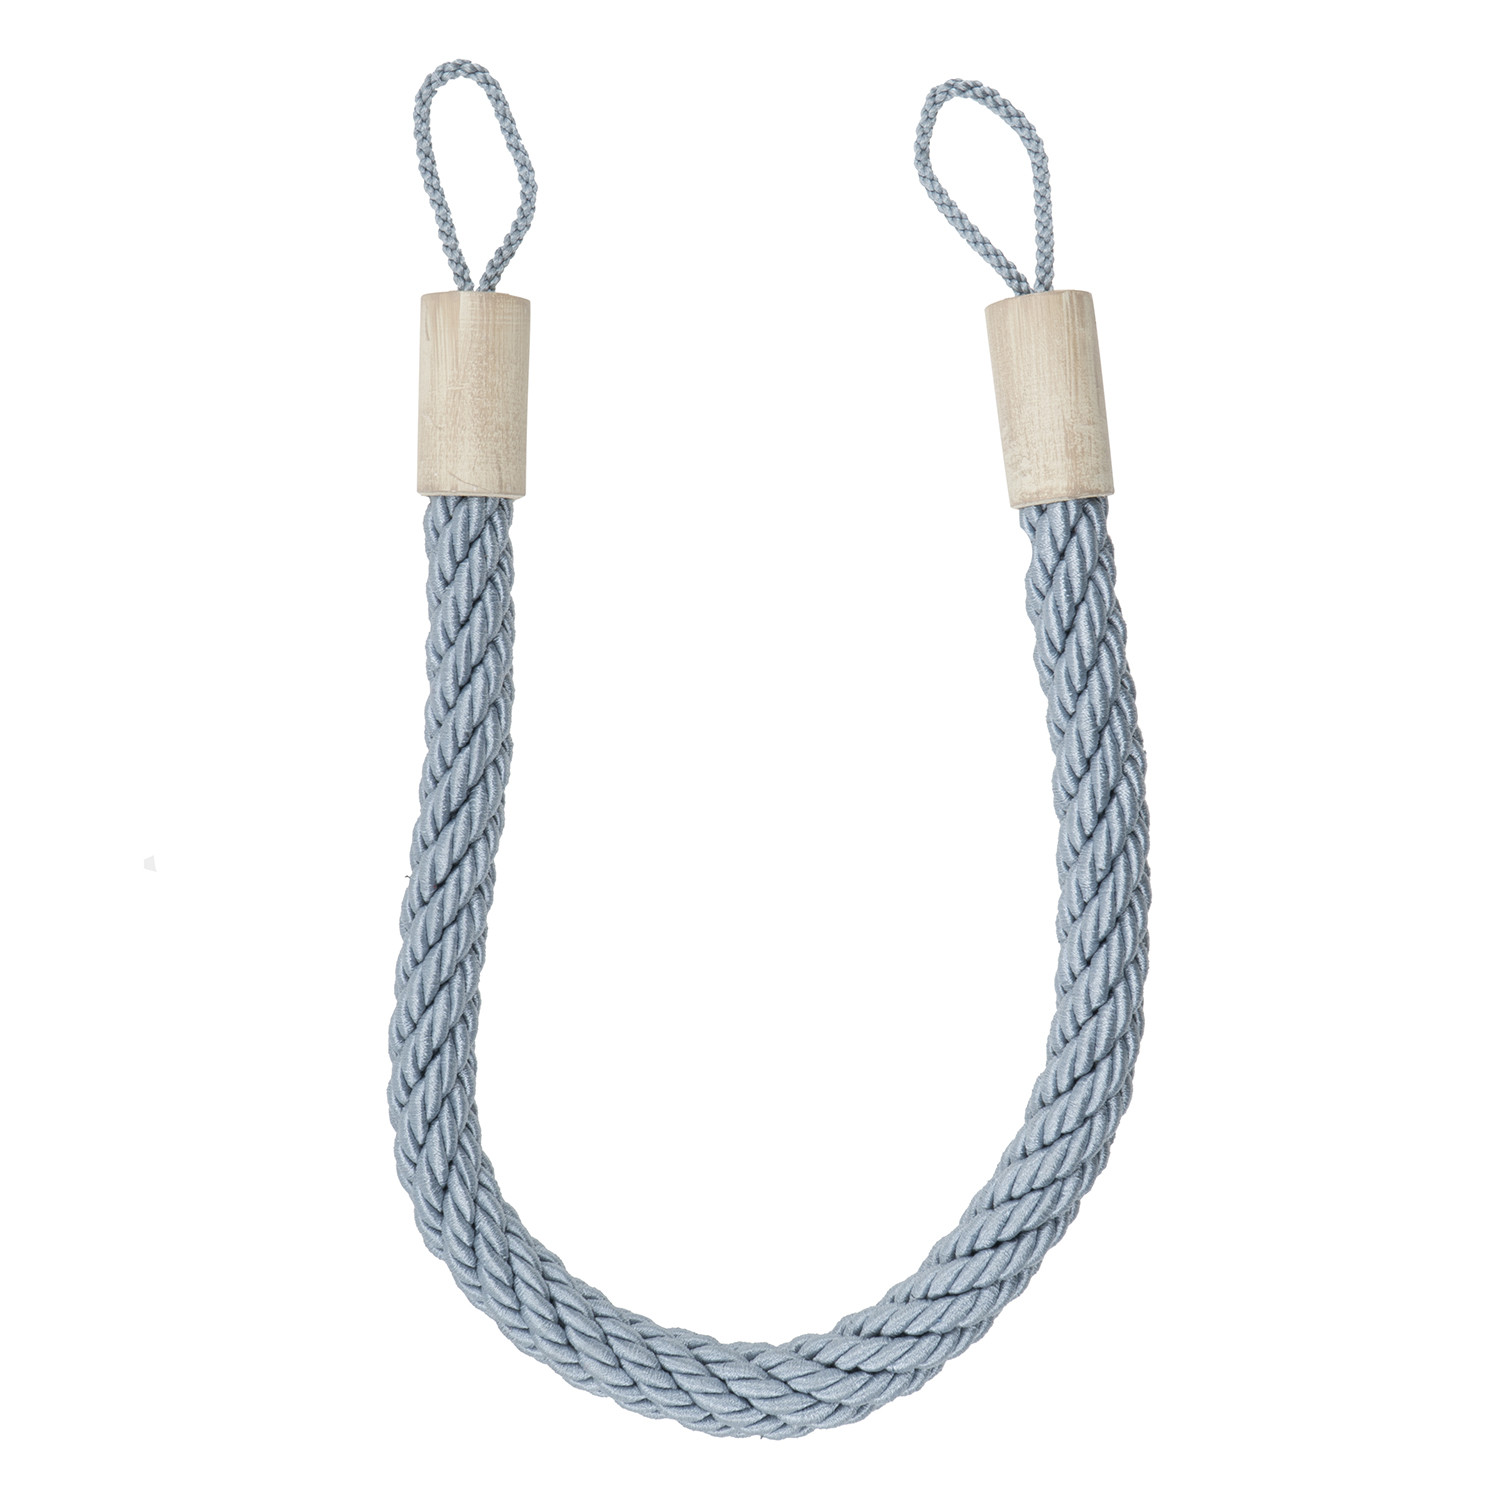 Rope Curtain Tie Back - Teal Image 1